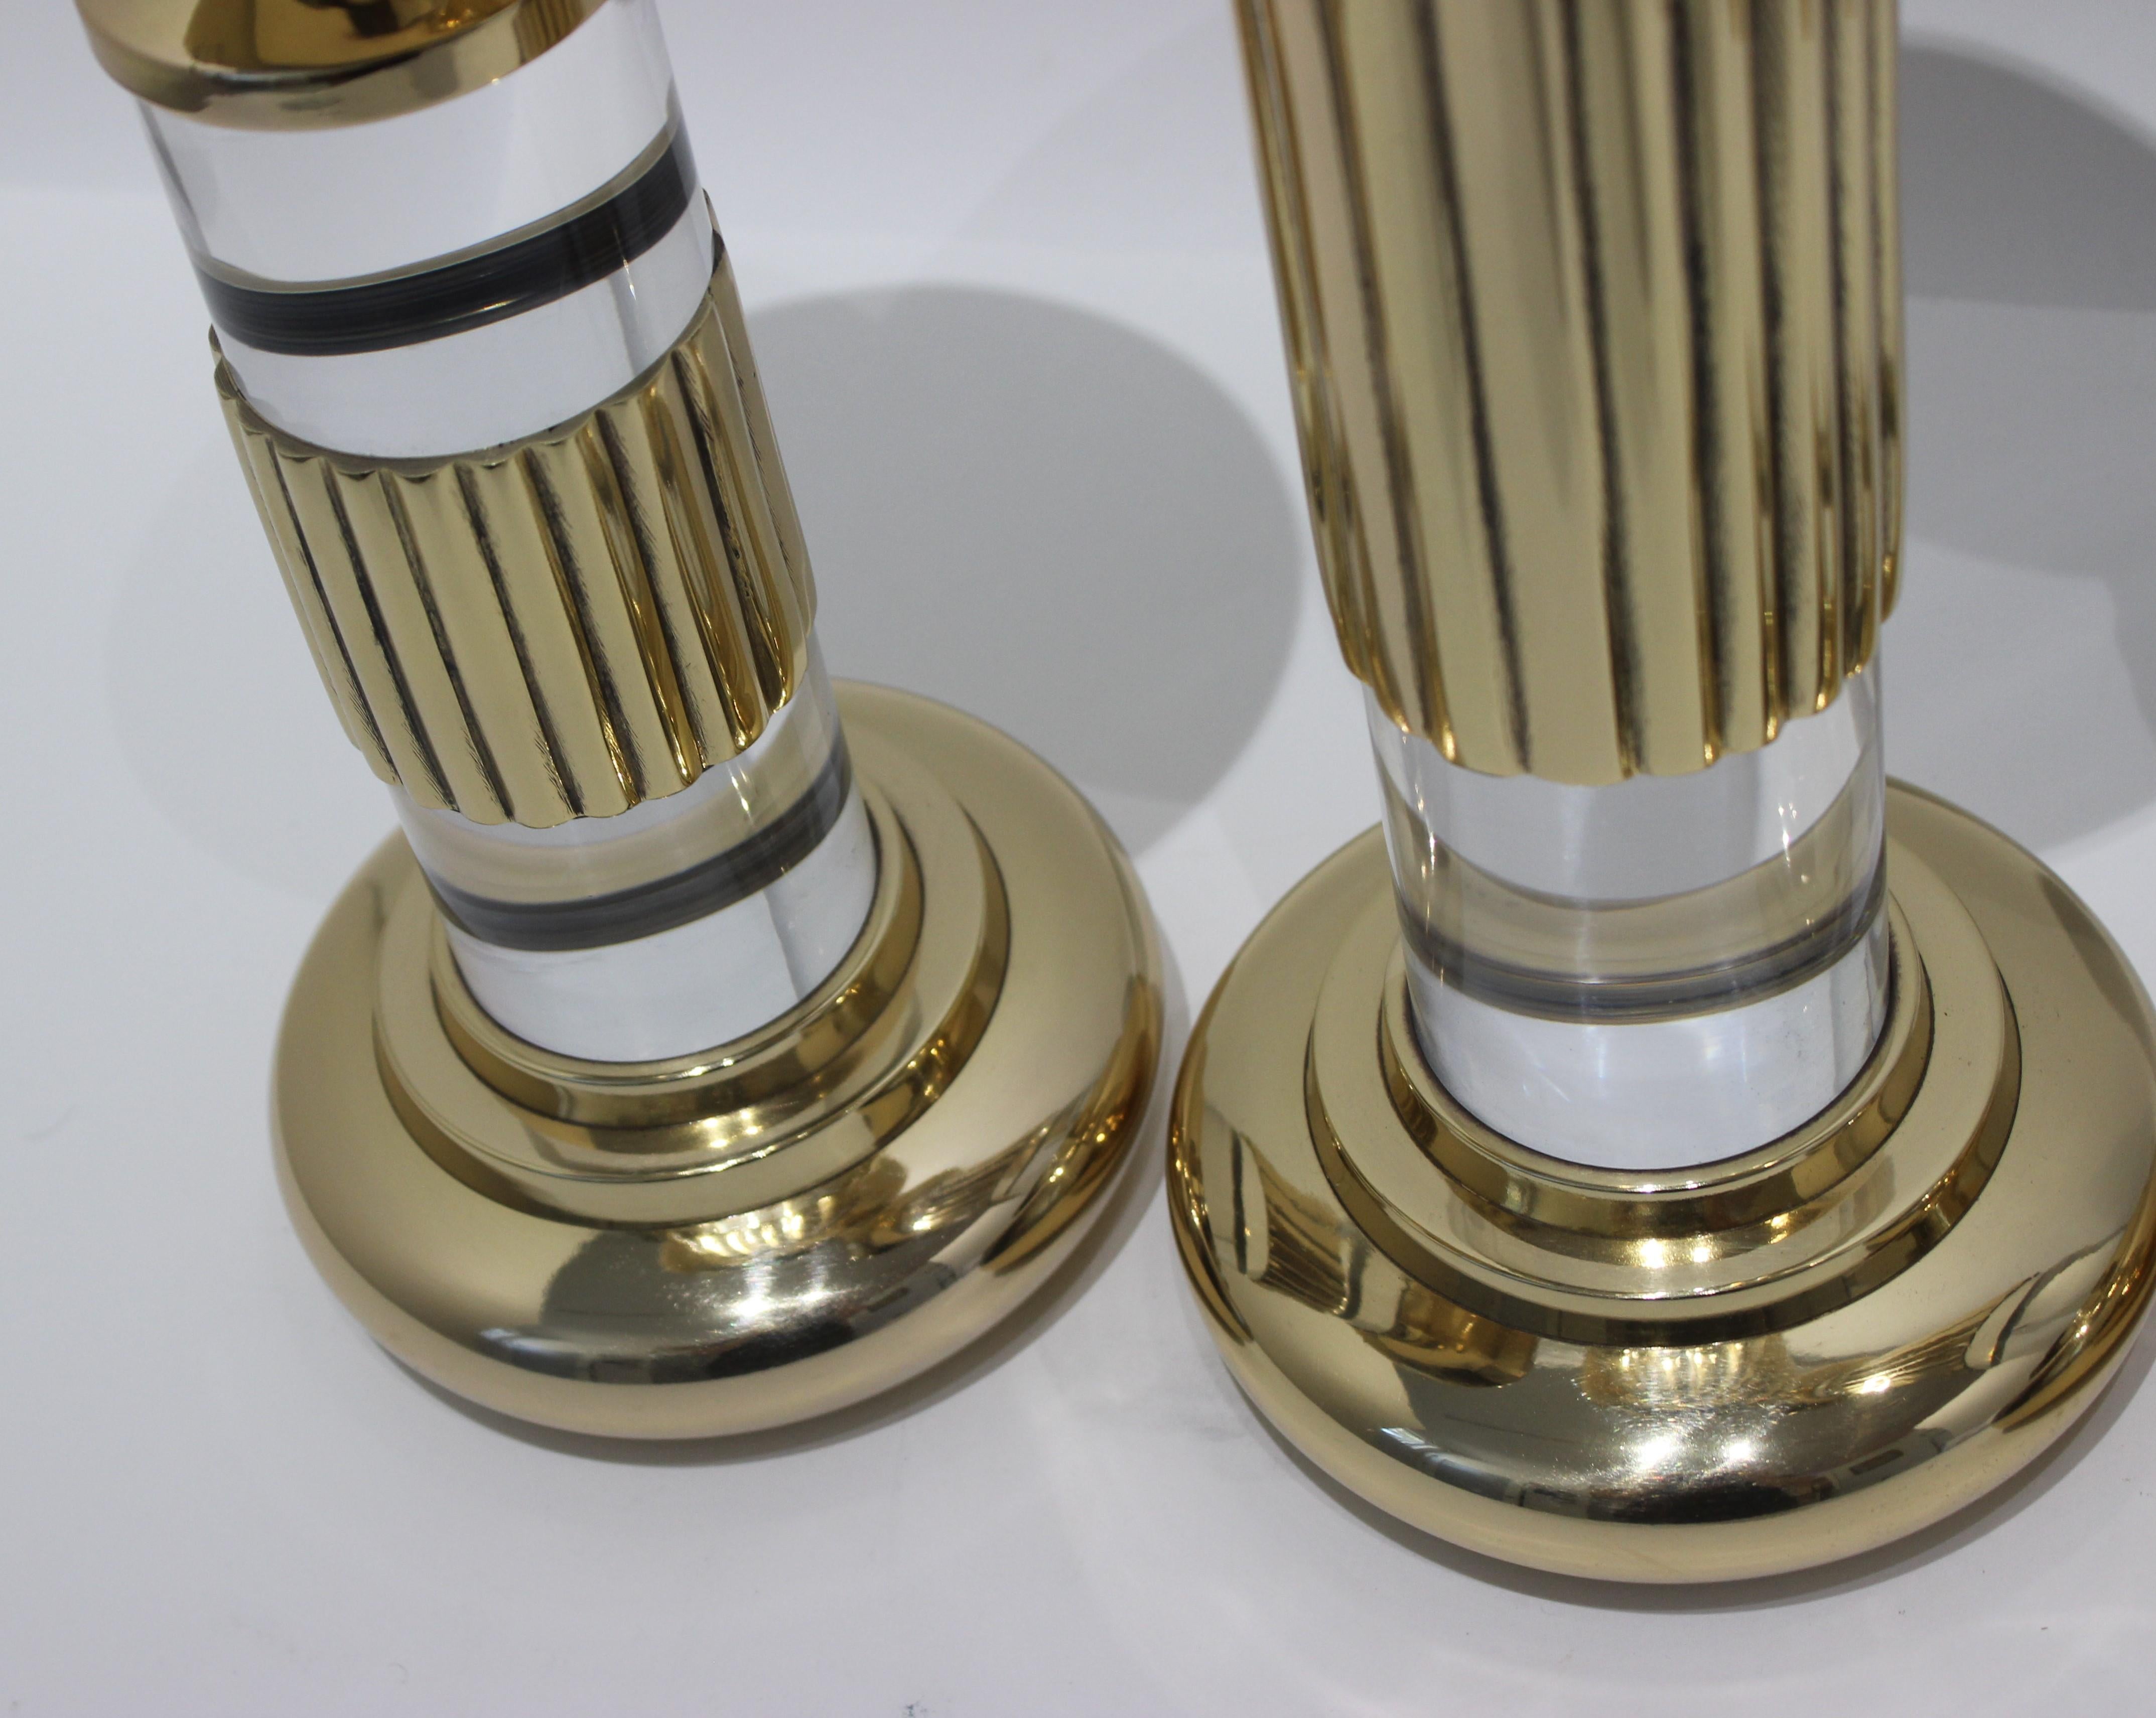 American Fluted Brass and Lucite Candlesticks by Dolbi Cashier